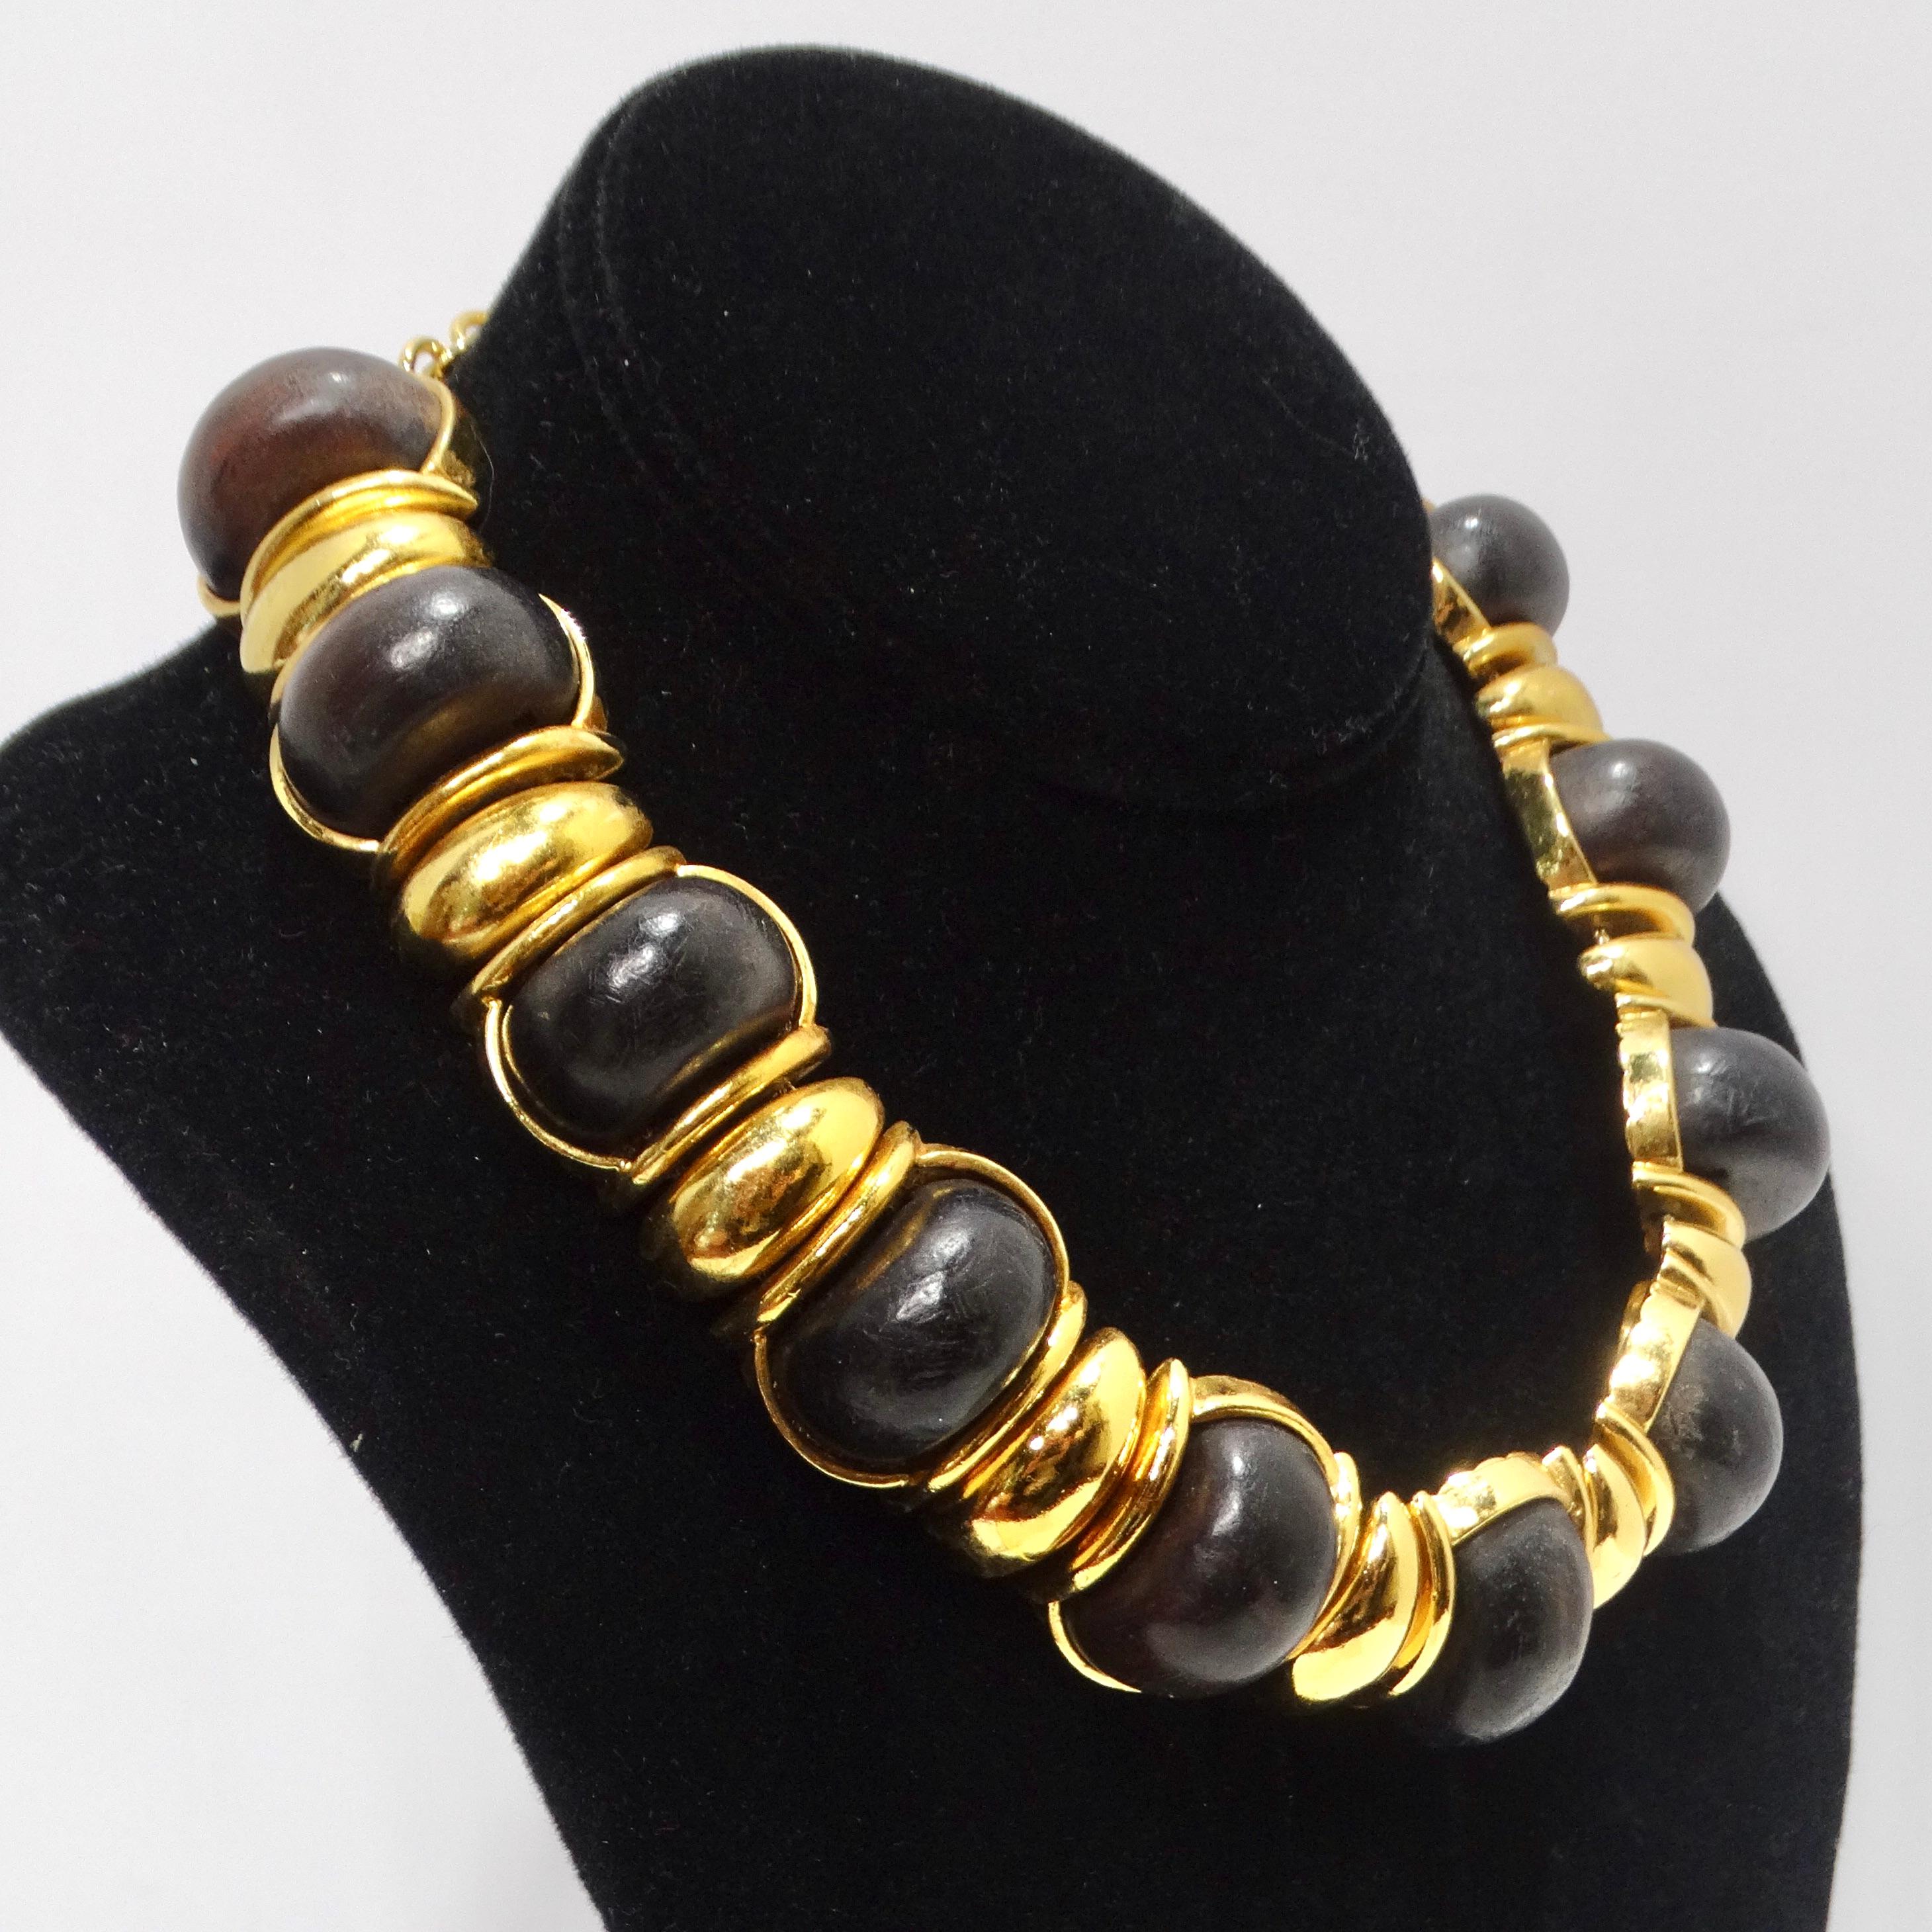 Do not miss out on a necklace that's not just an accessory but a fashion statement - the Yves Saint Laurent 1980s Gold Tone Wood Choker Necklace. This vintage choker necklace combines exotic black wood with bold gold tone metal links to create a